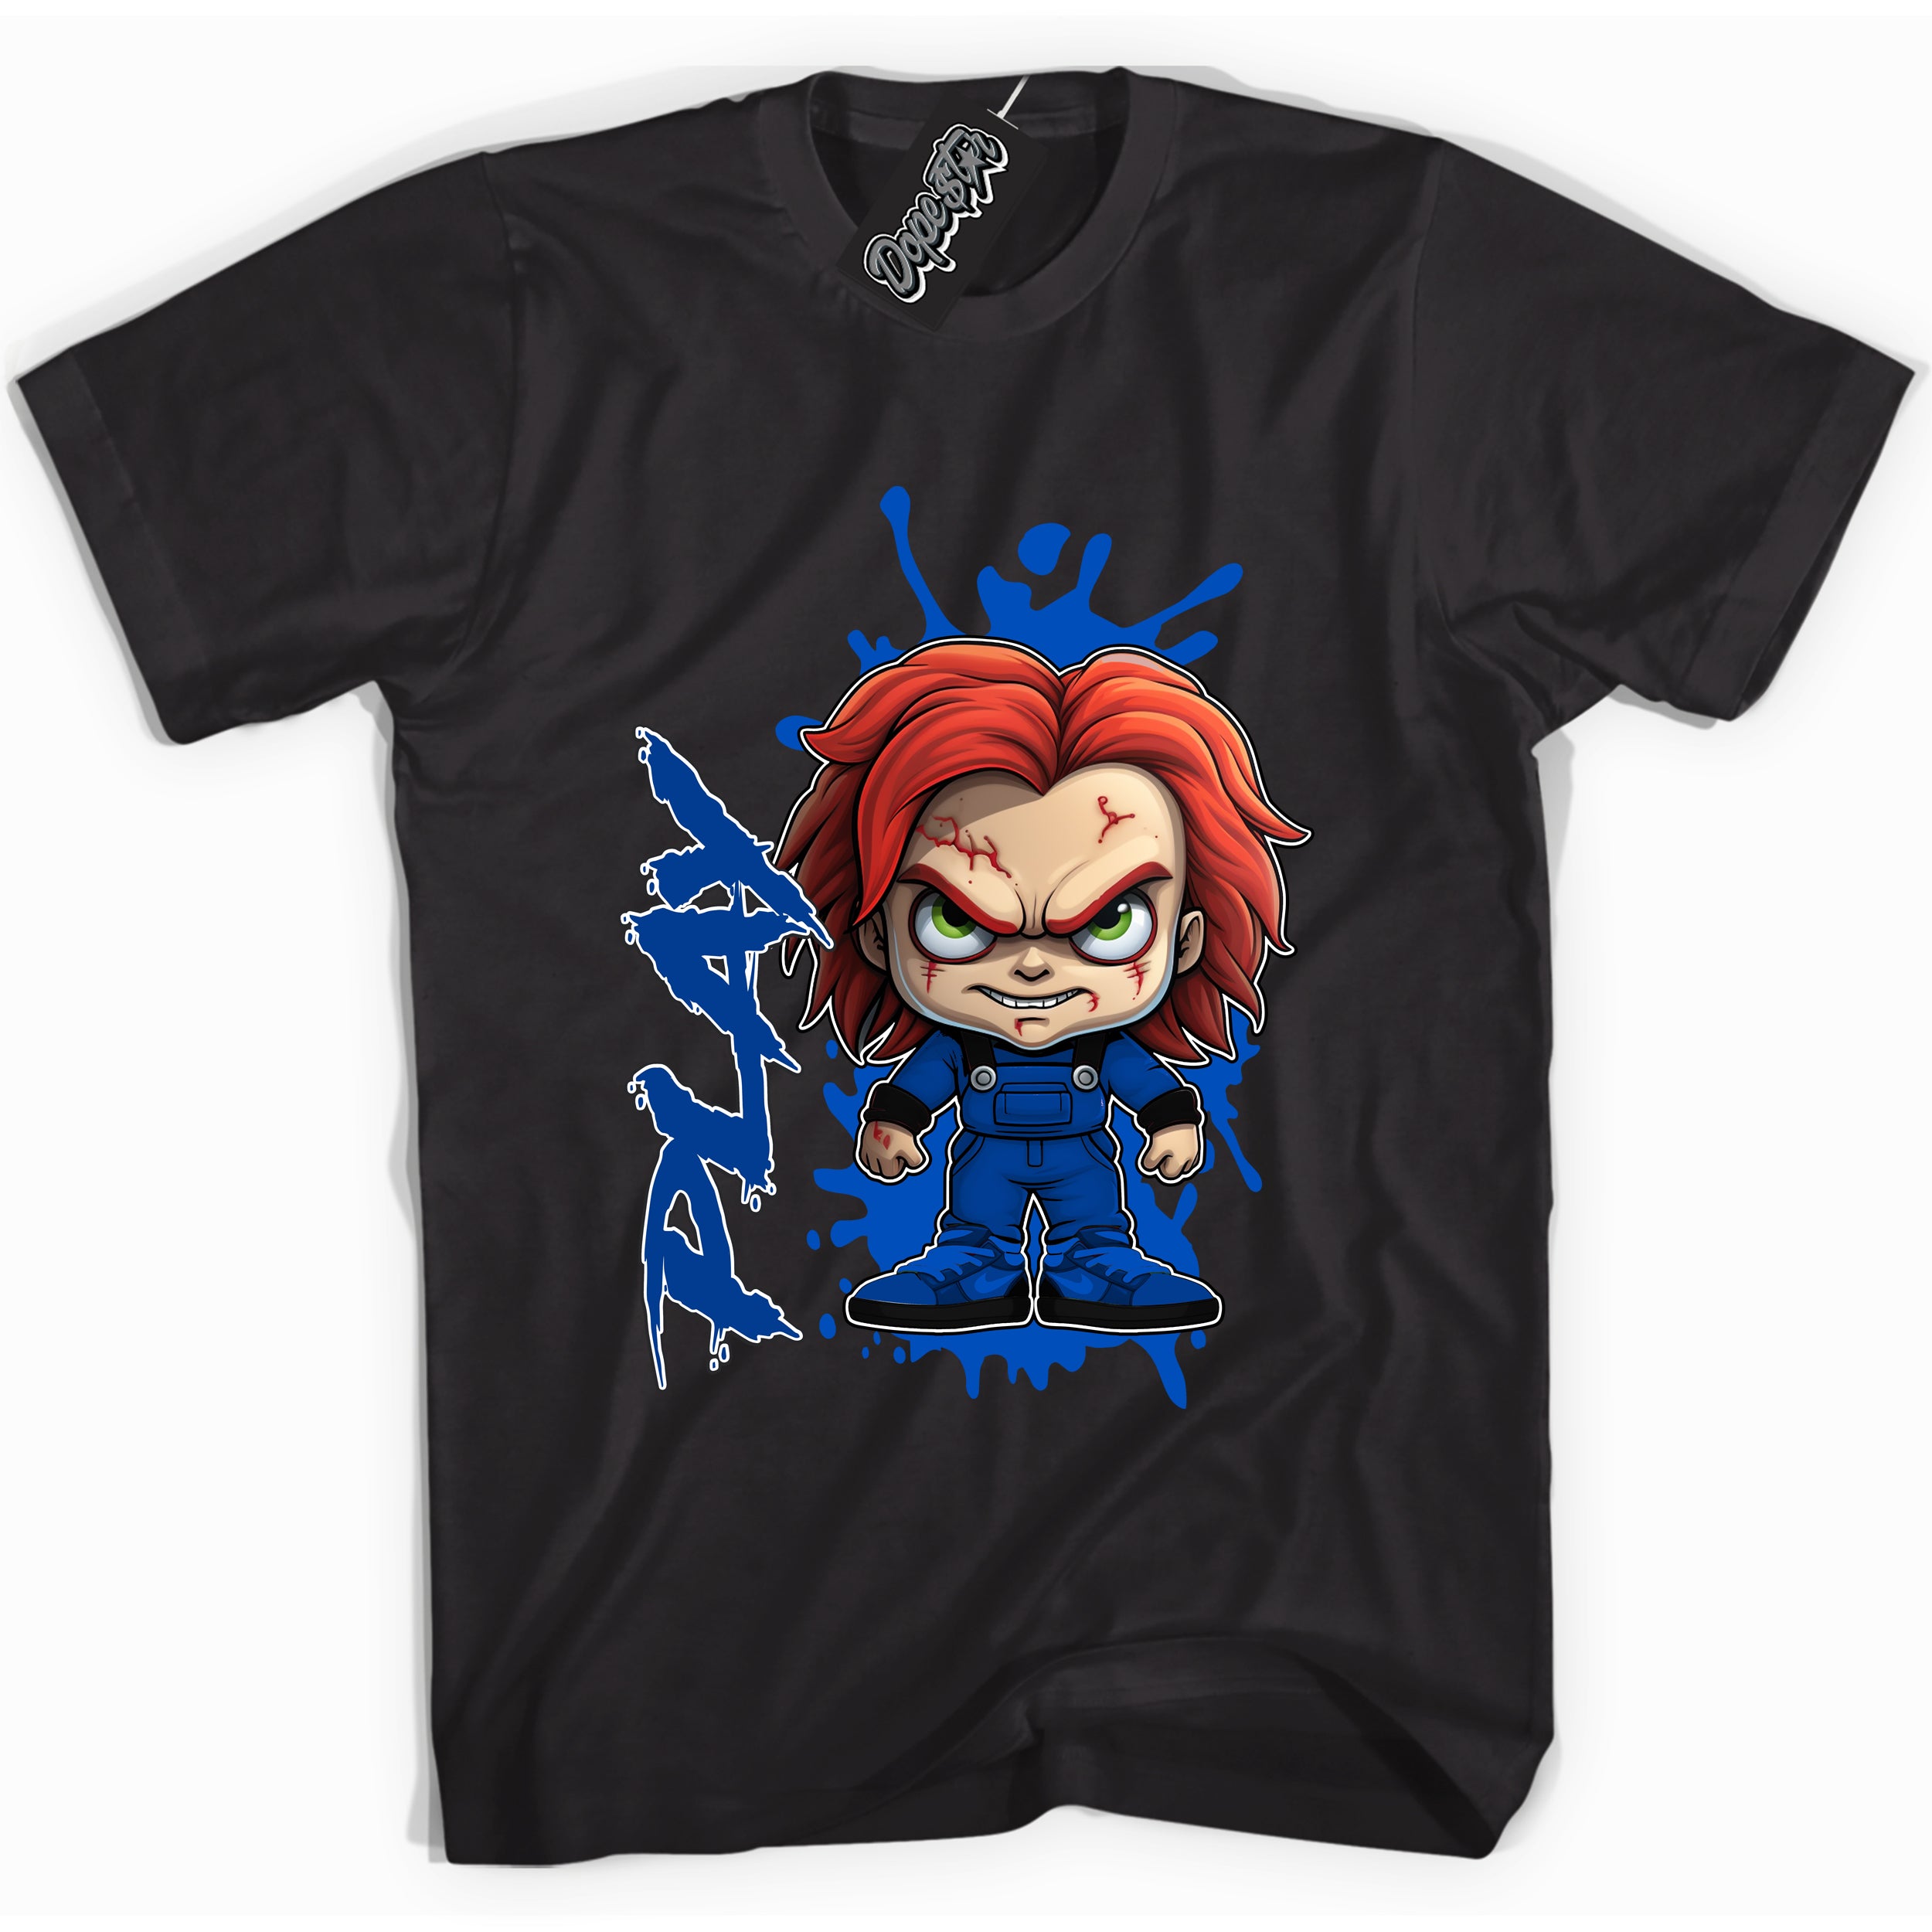 Cool Black graphic tee with "Chucky Play" design, that perfectly matches Royal Reimagined 1s sneakers 